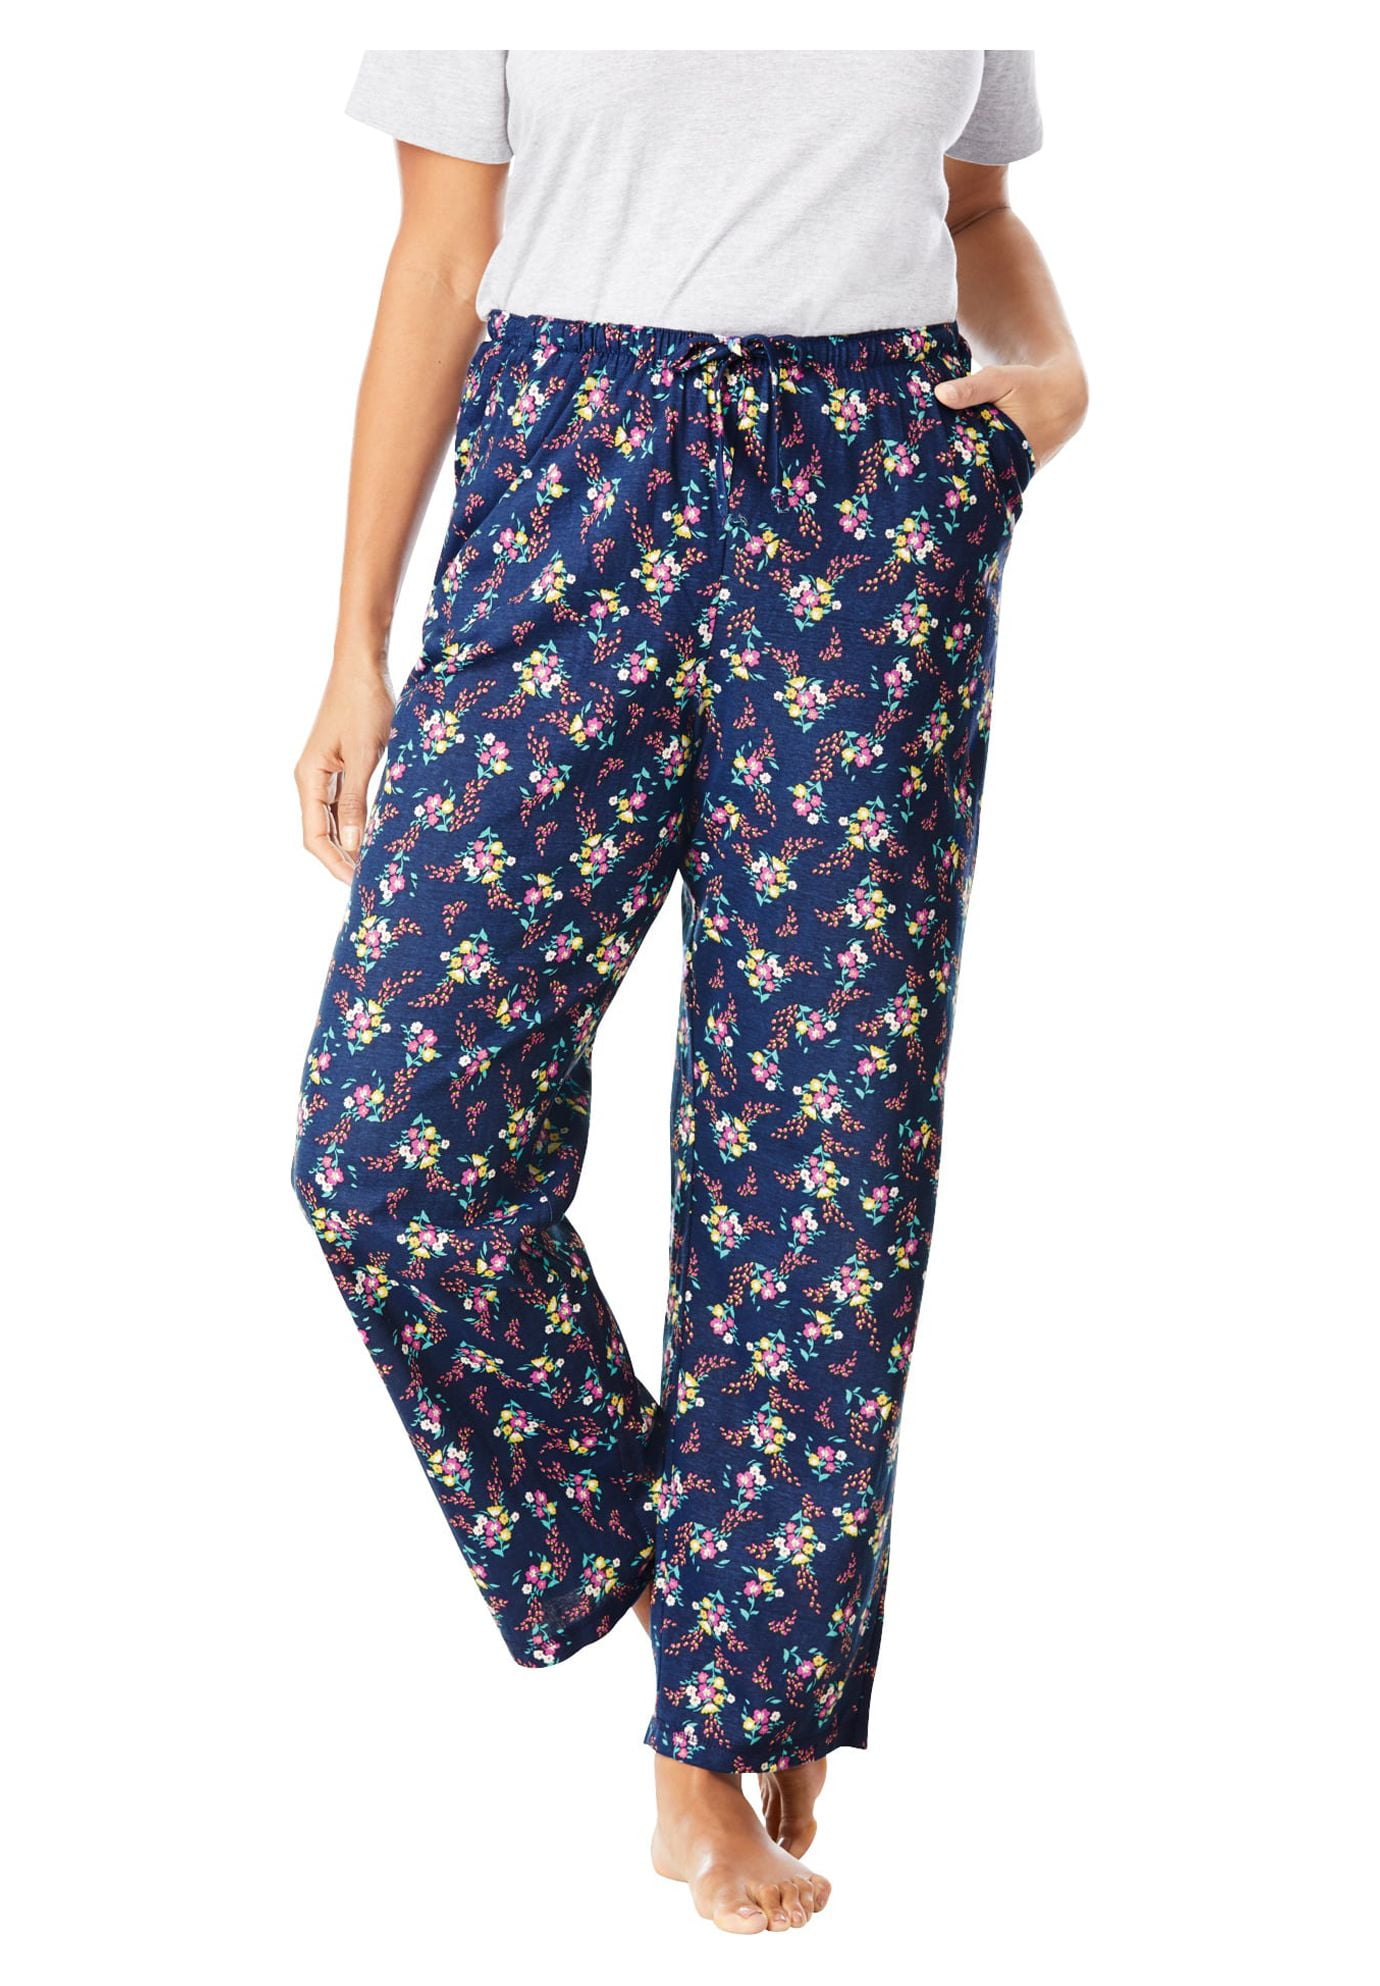 Cotton Flower Print Two Piece Summer Pajama Set For Women O Neck, Elastic  Waist, Loose Fit, Wide Leg, Plus Size, Perfect For Sleeping And Nighttime  Comfort From Cnlongbida, $12.82